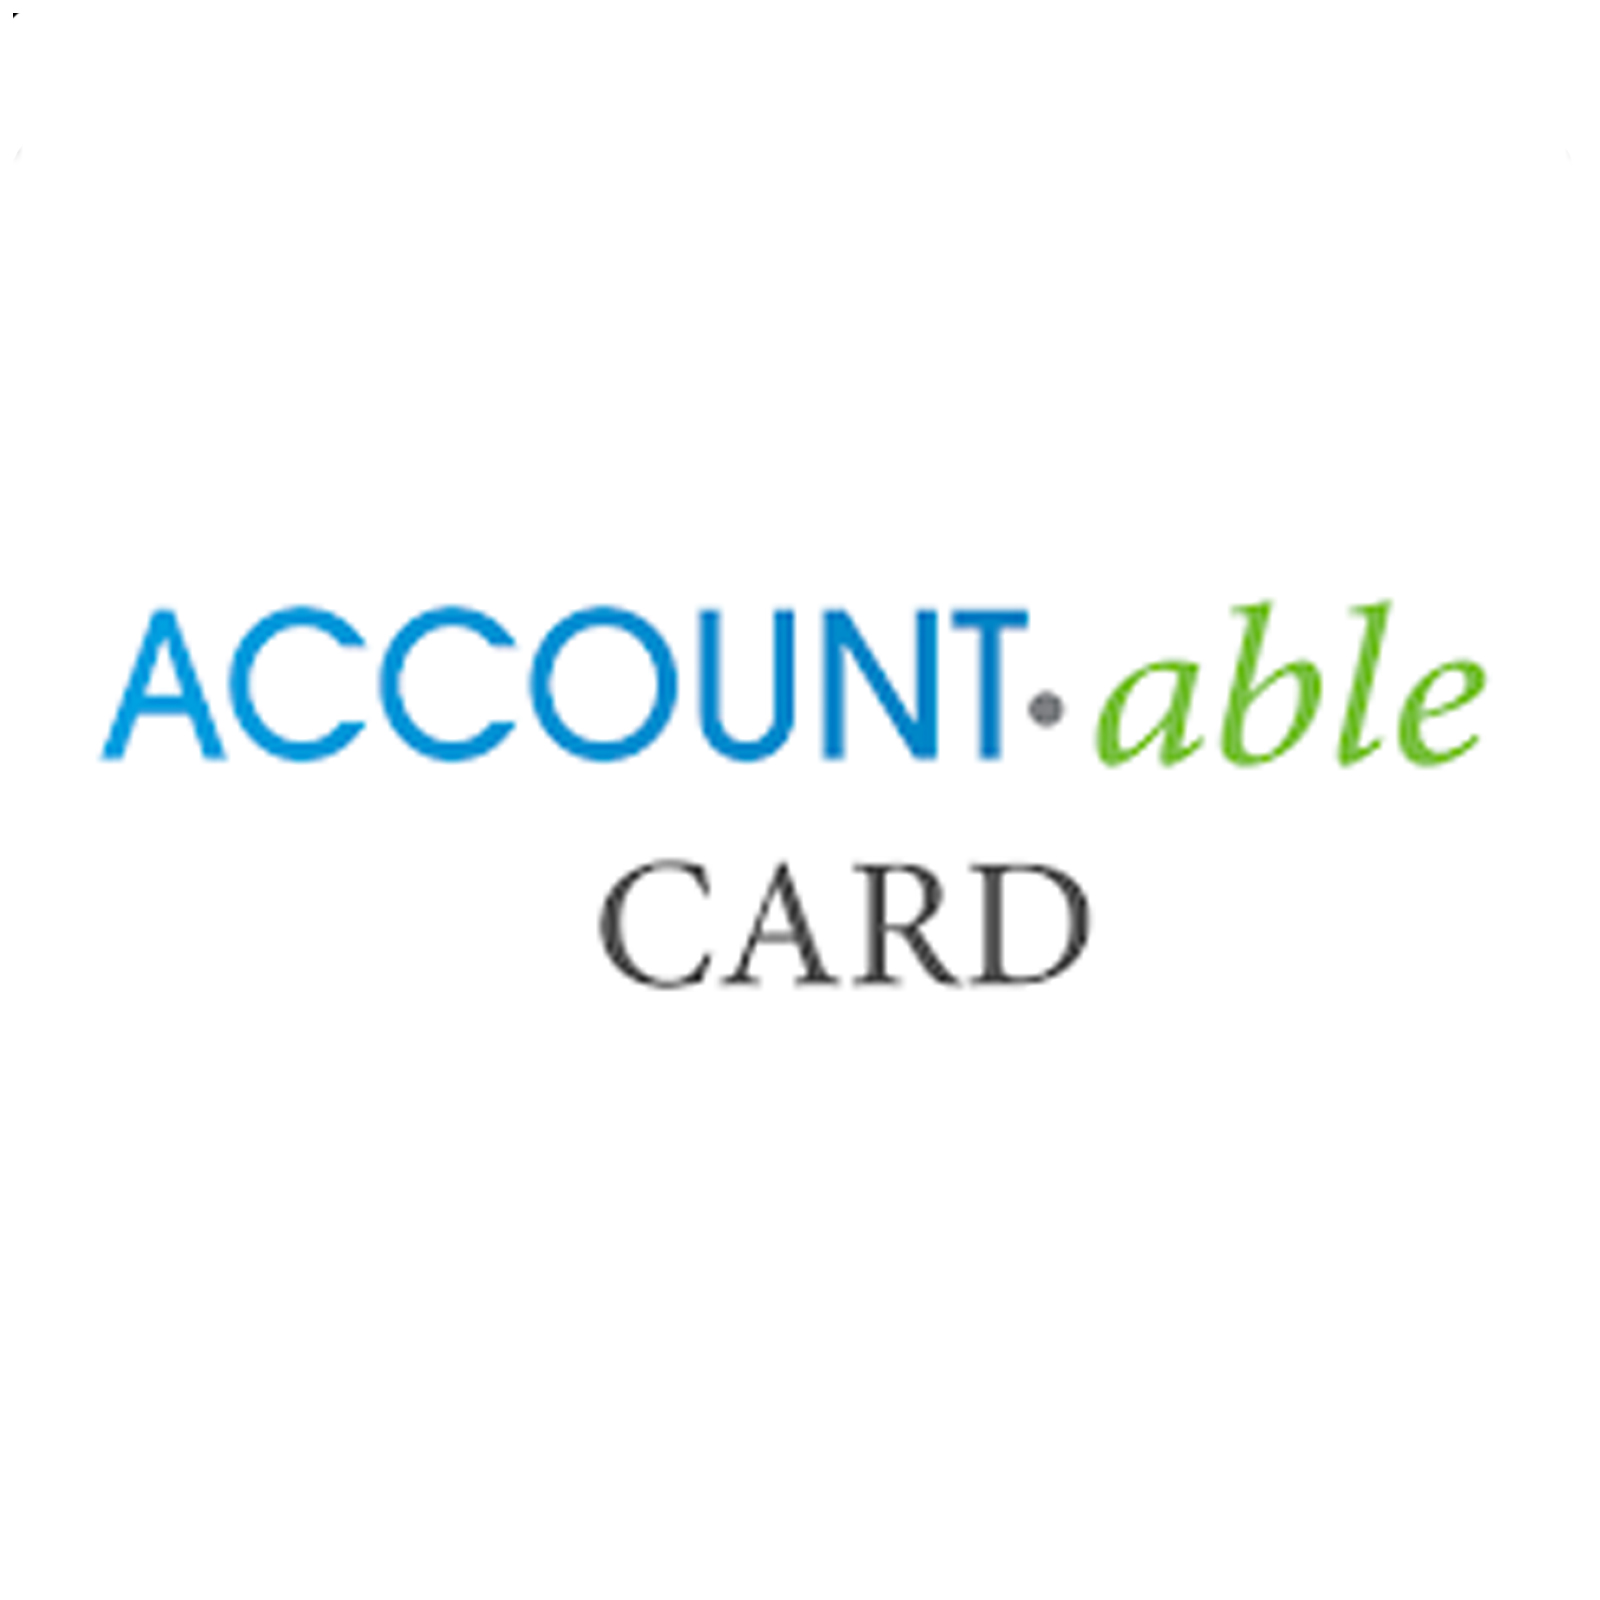 Art for THE ACCOUNTABLE CARD PROMO 30sec by Untitled Artist